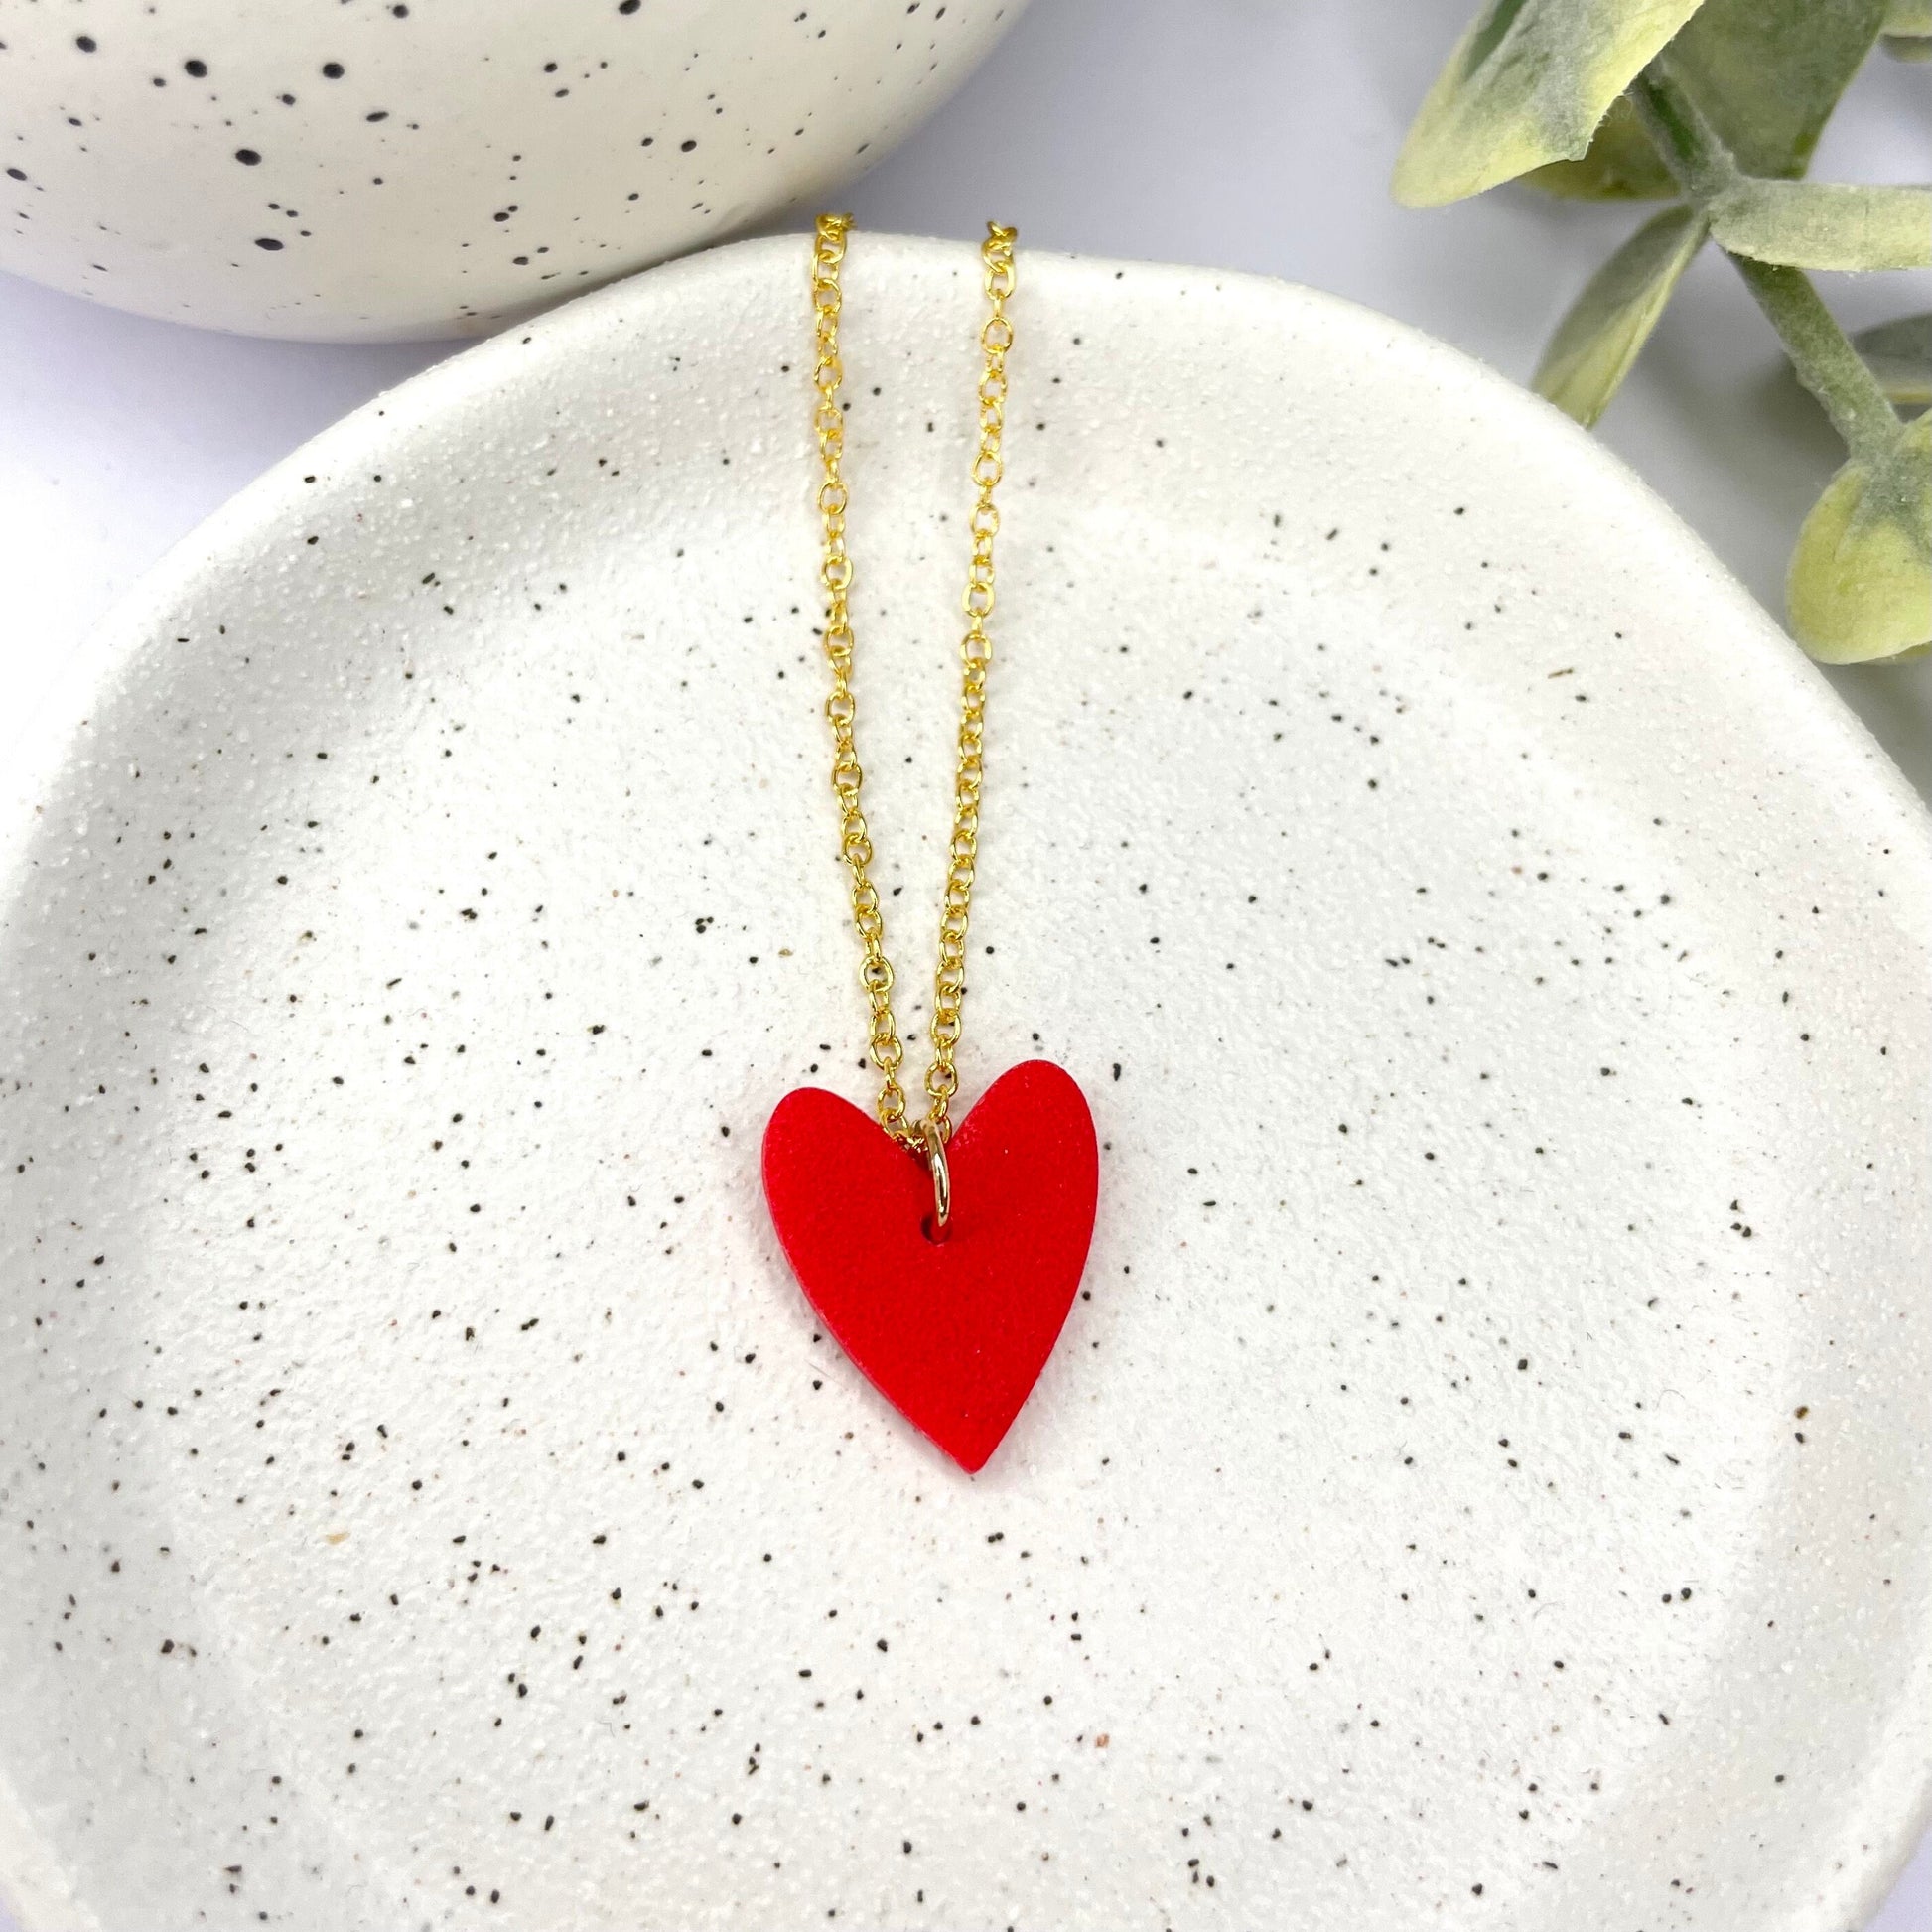 Red heart necklace, Valentine’s gift for her, heart shaped polymer clay necklace on 18k gold plated chain, wife gift, girlfriend gift